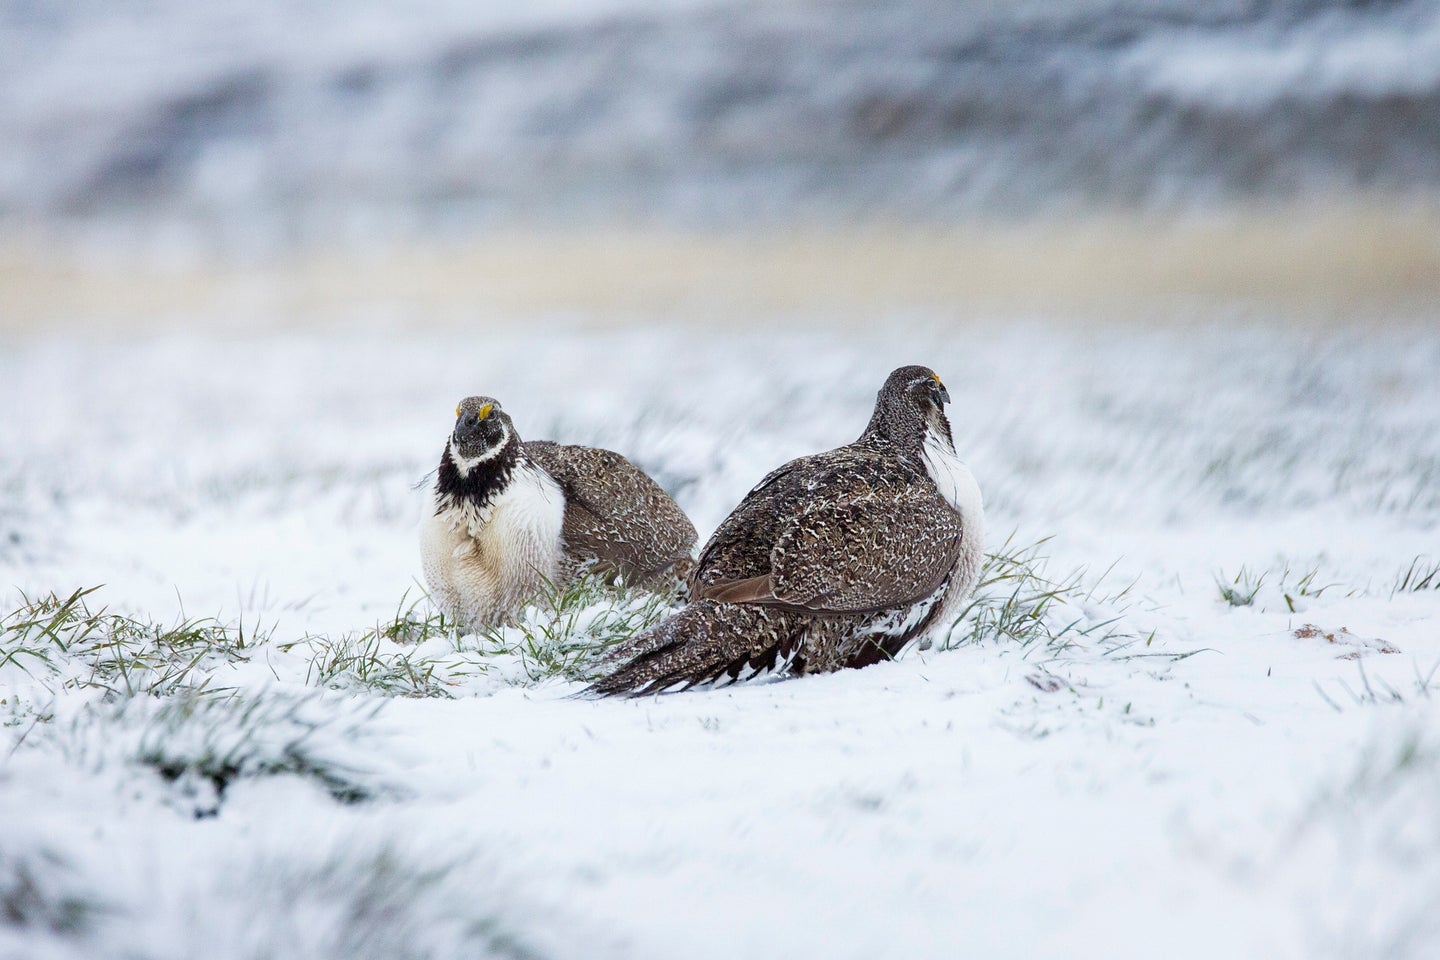 Two greater sage grouse sitting in the snow.